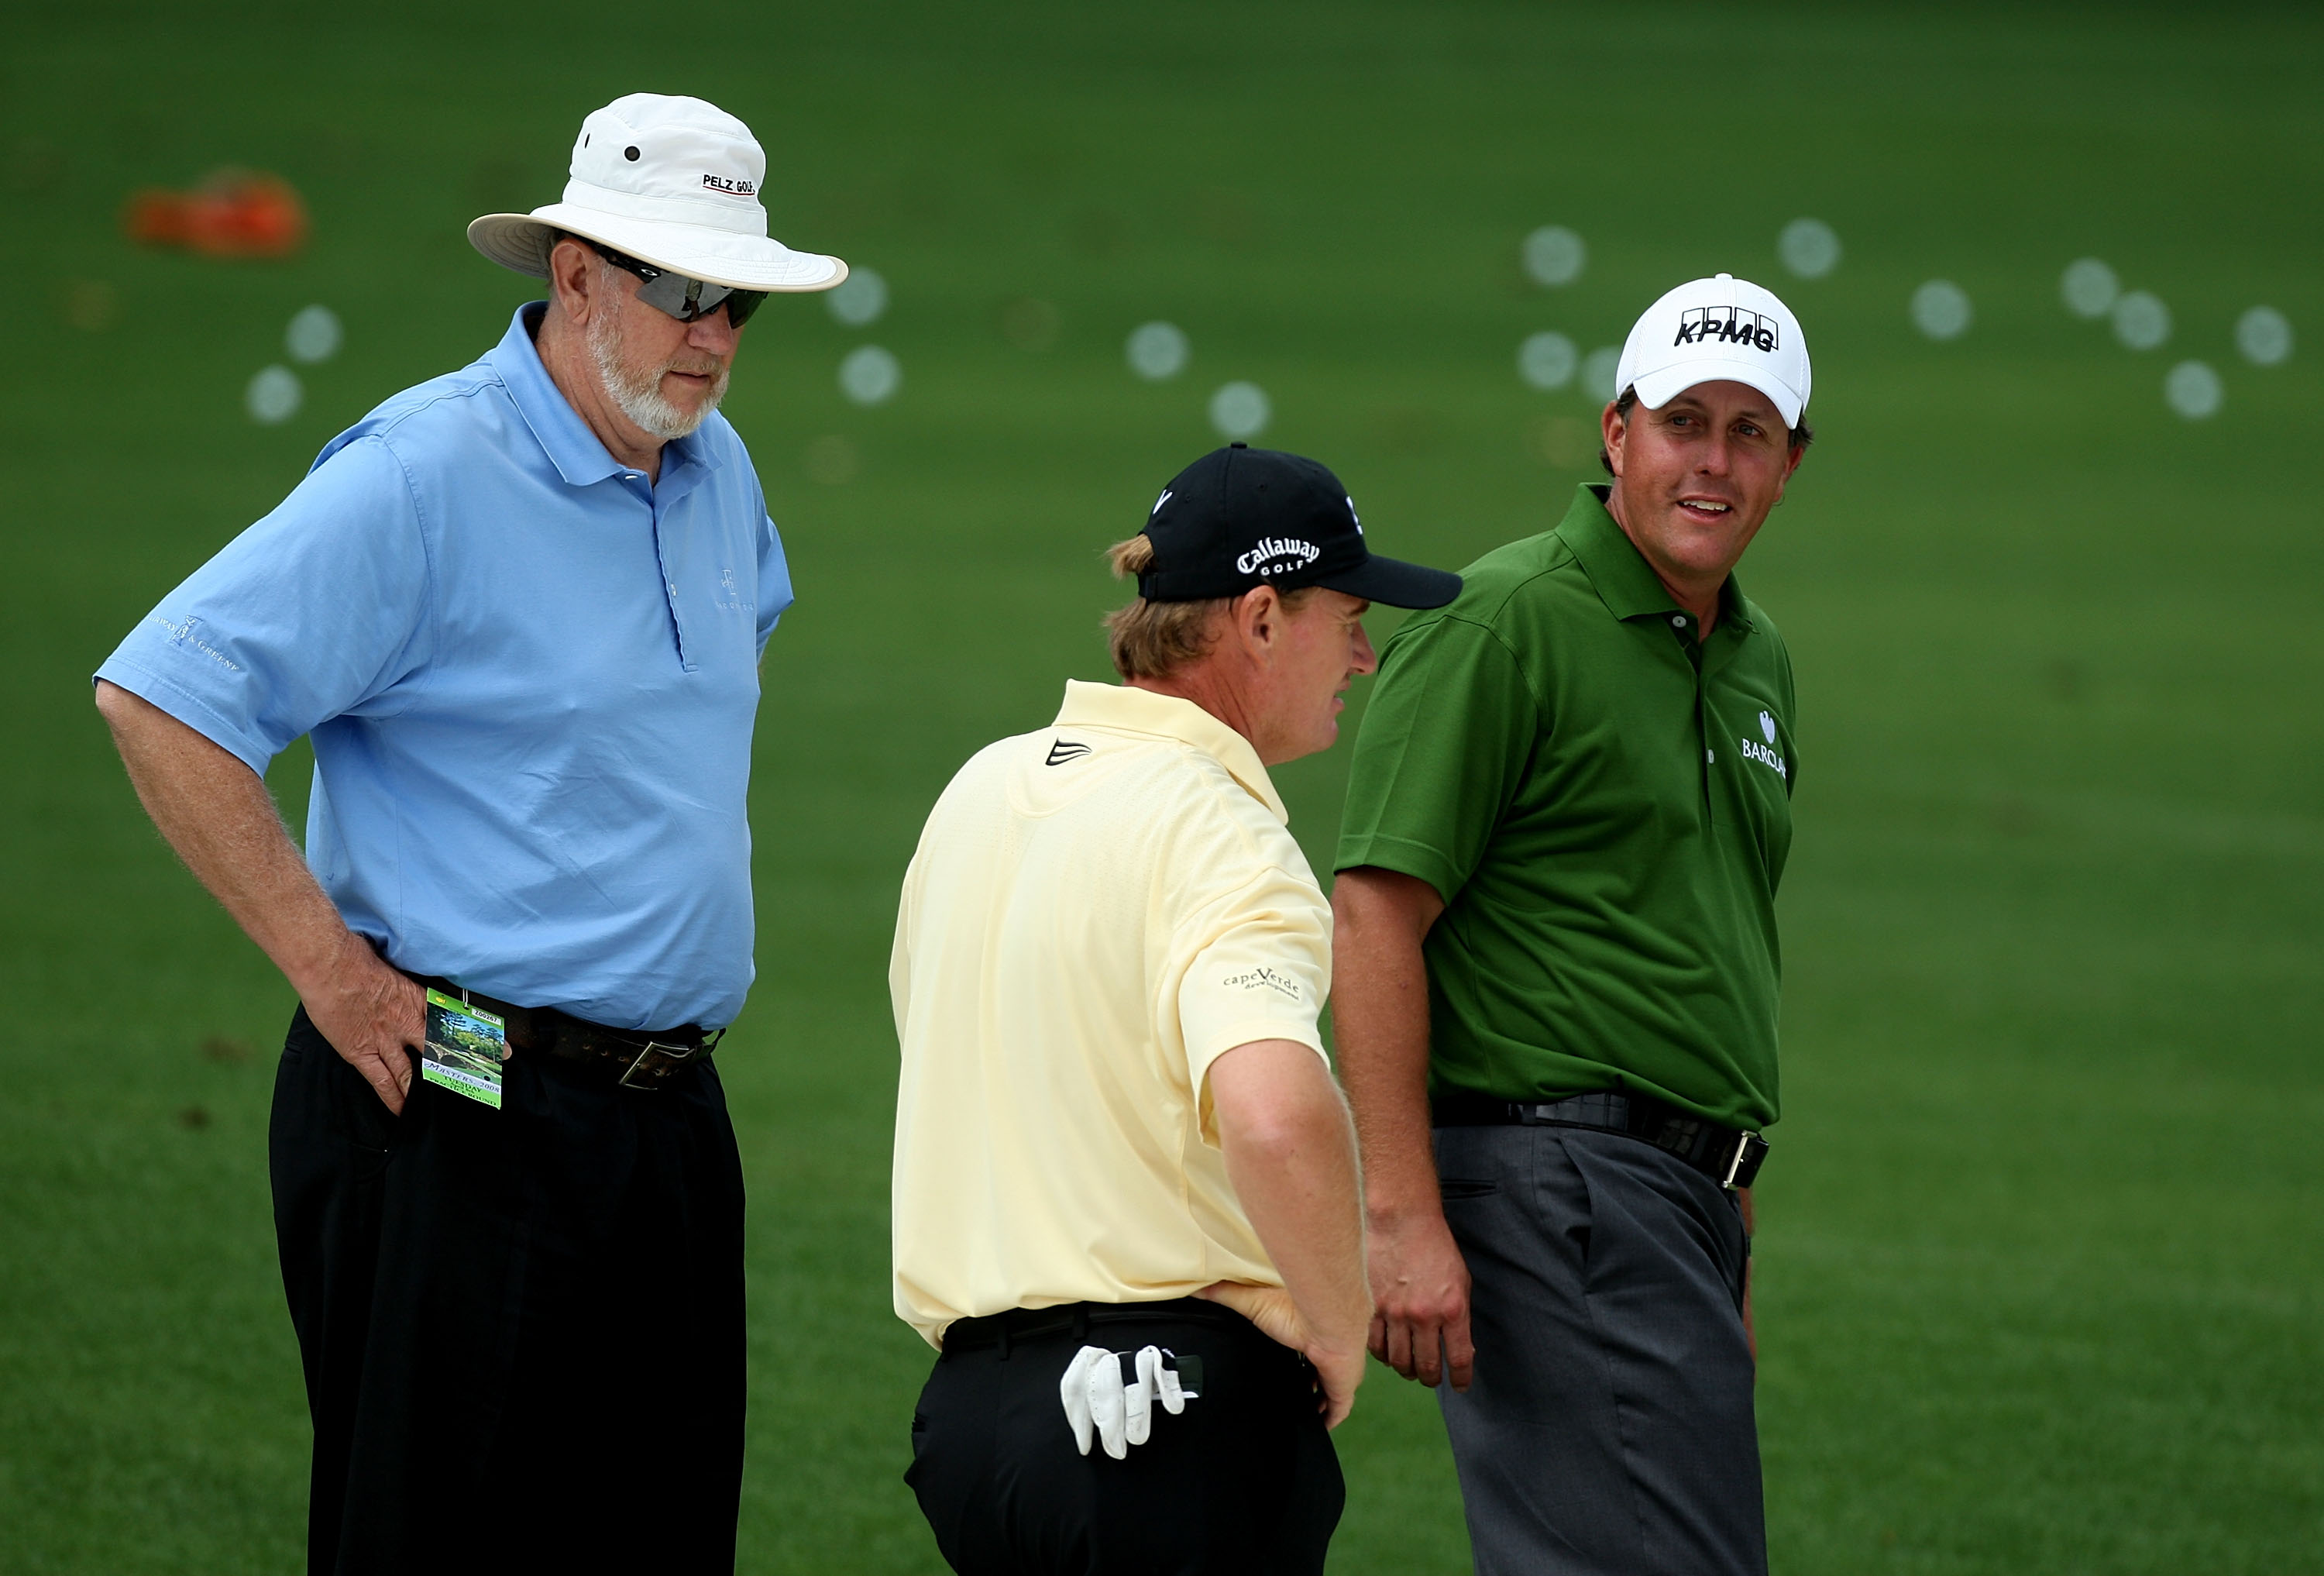 Dave Pelz on NASA background, inventing short game, and changing wedges forever